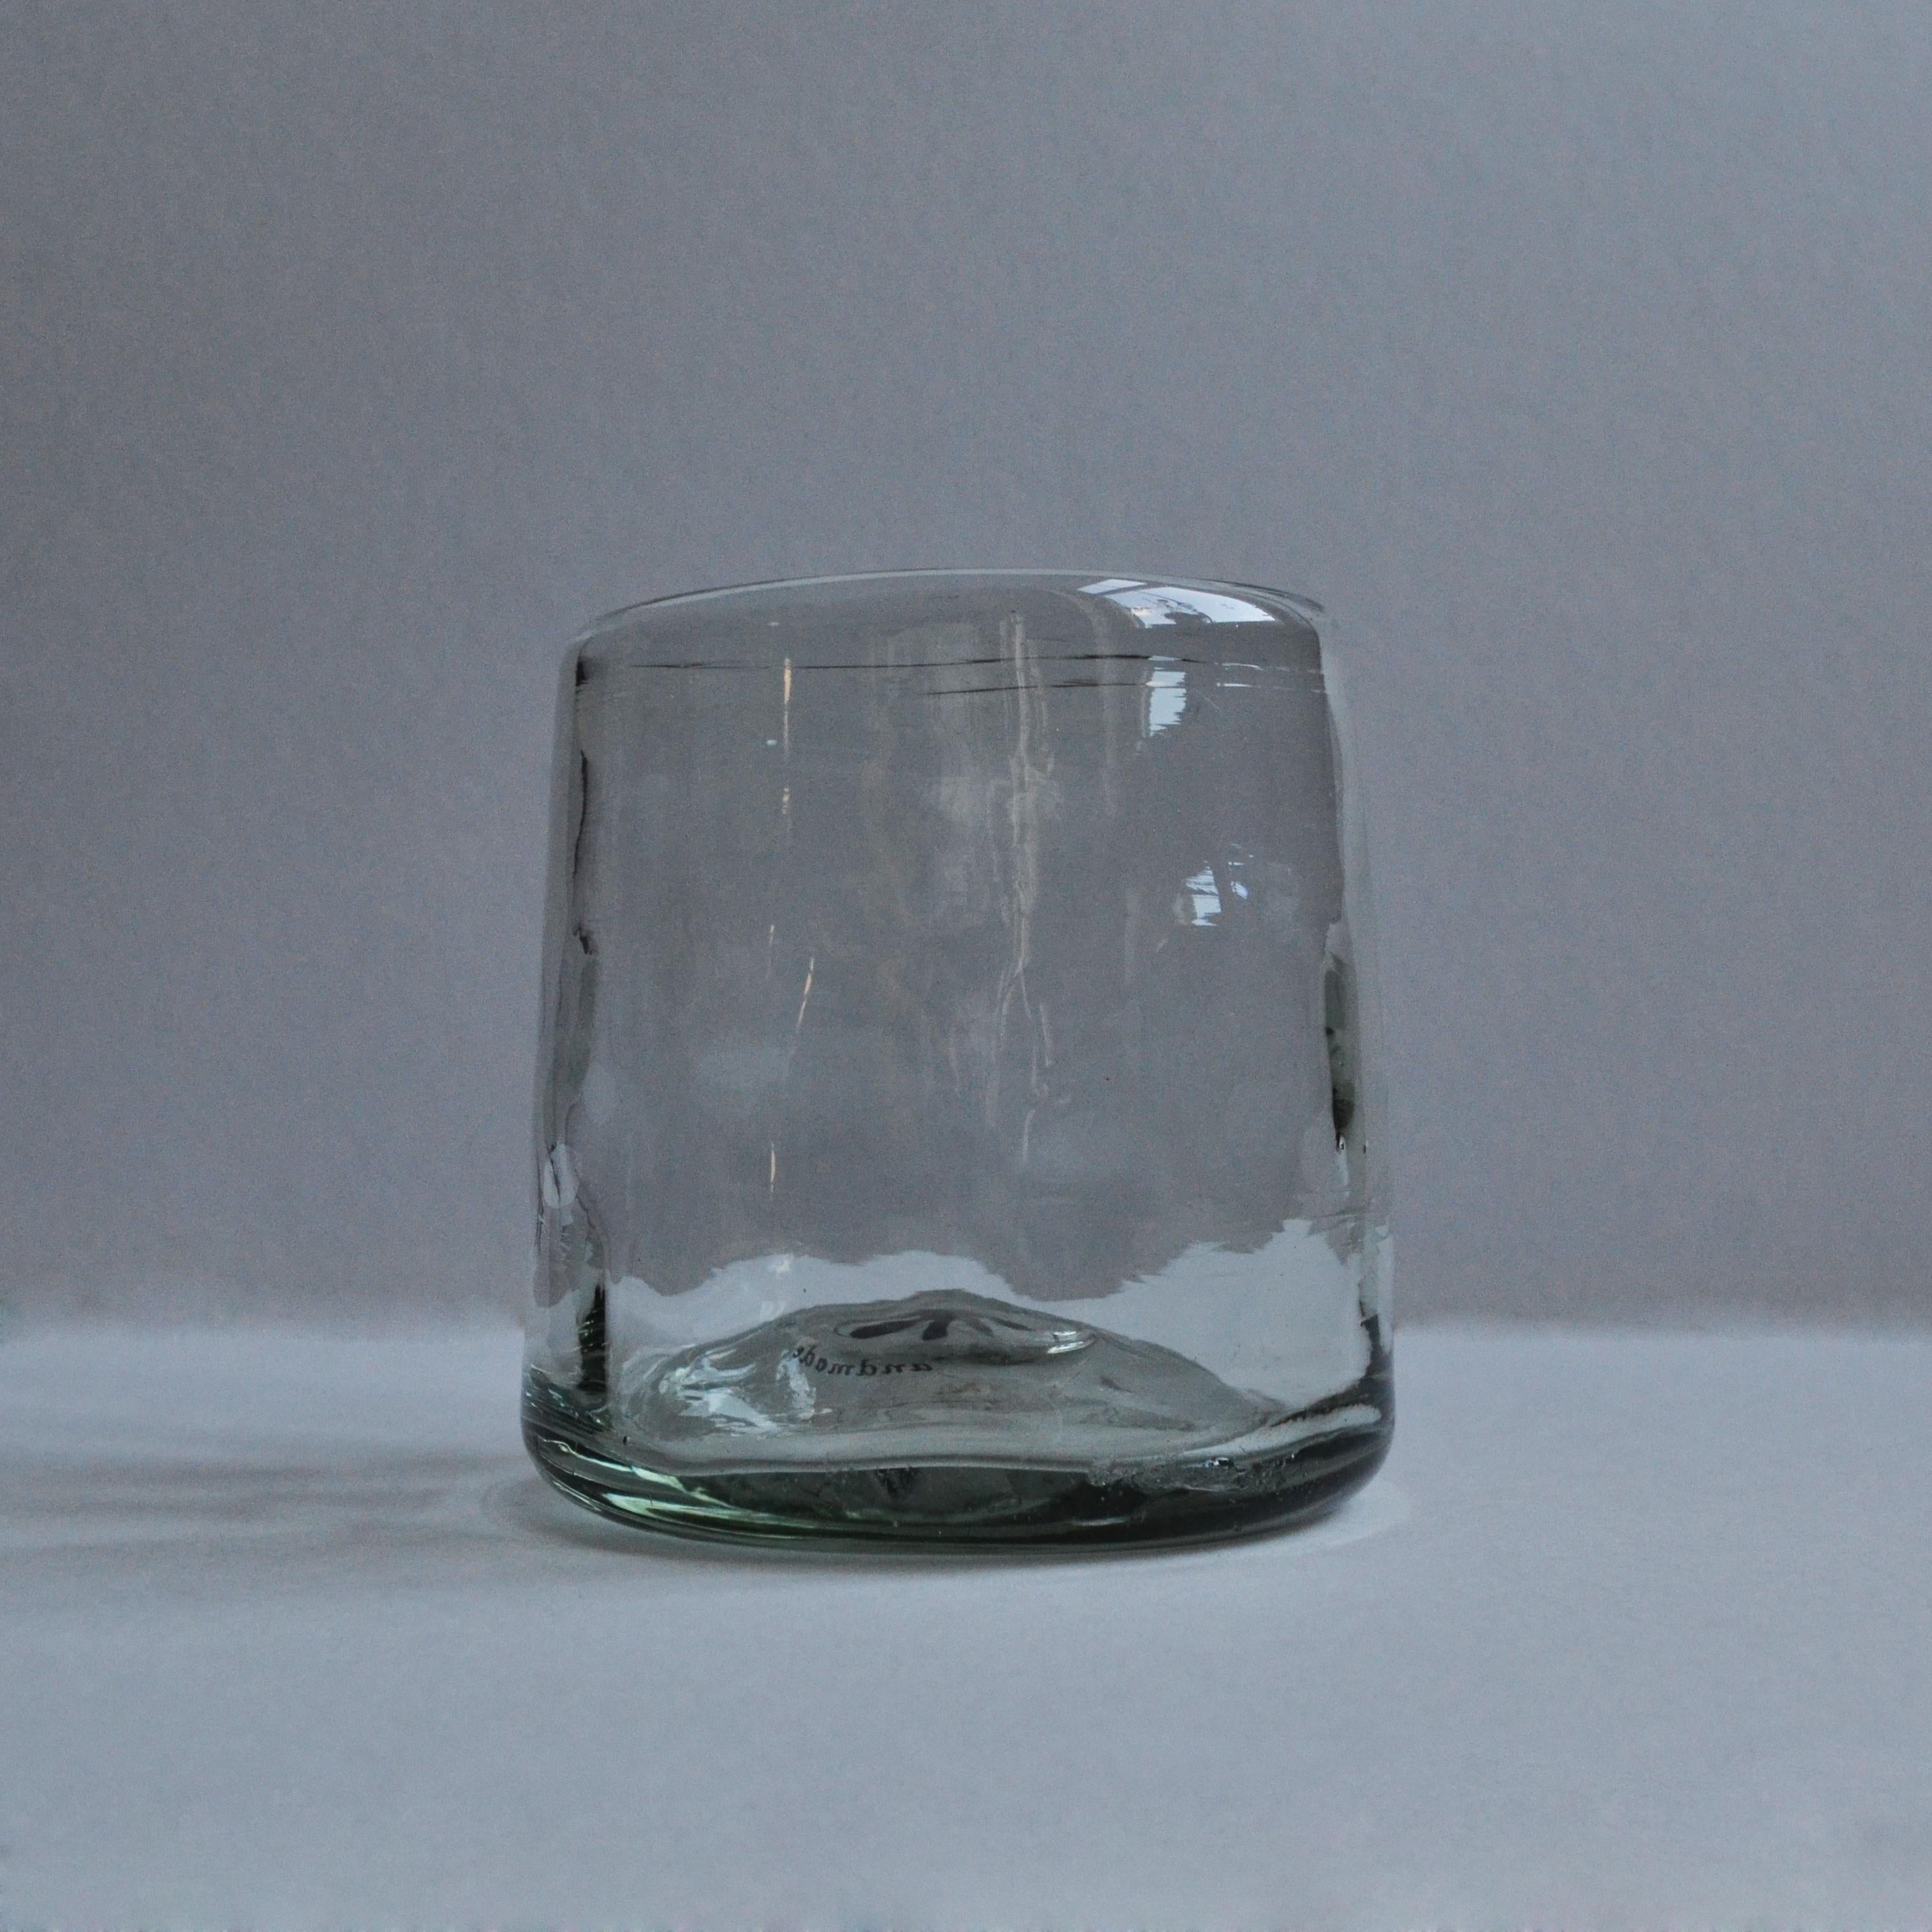 100% recycled glass cups